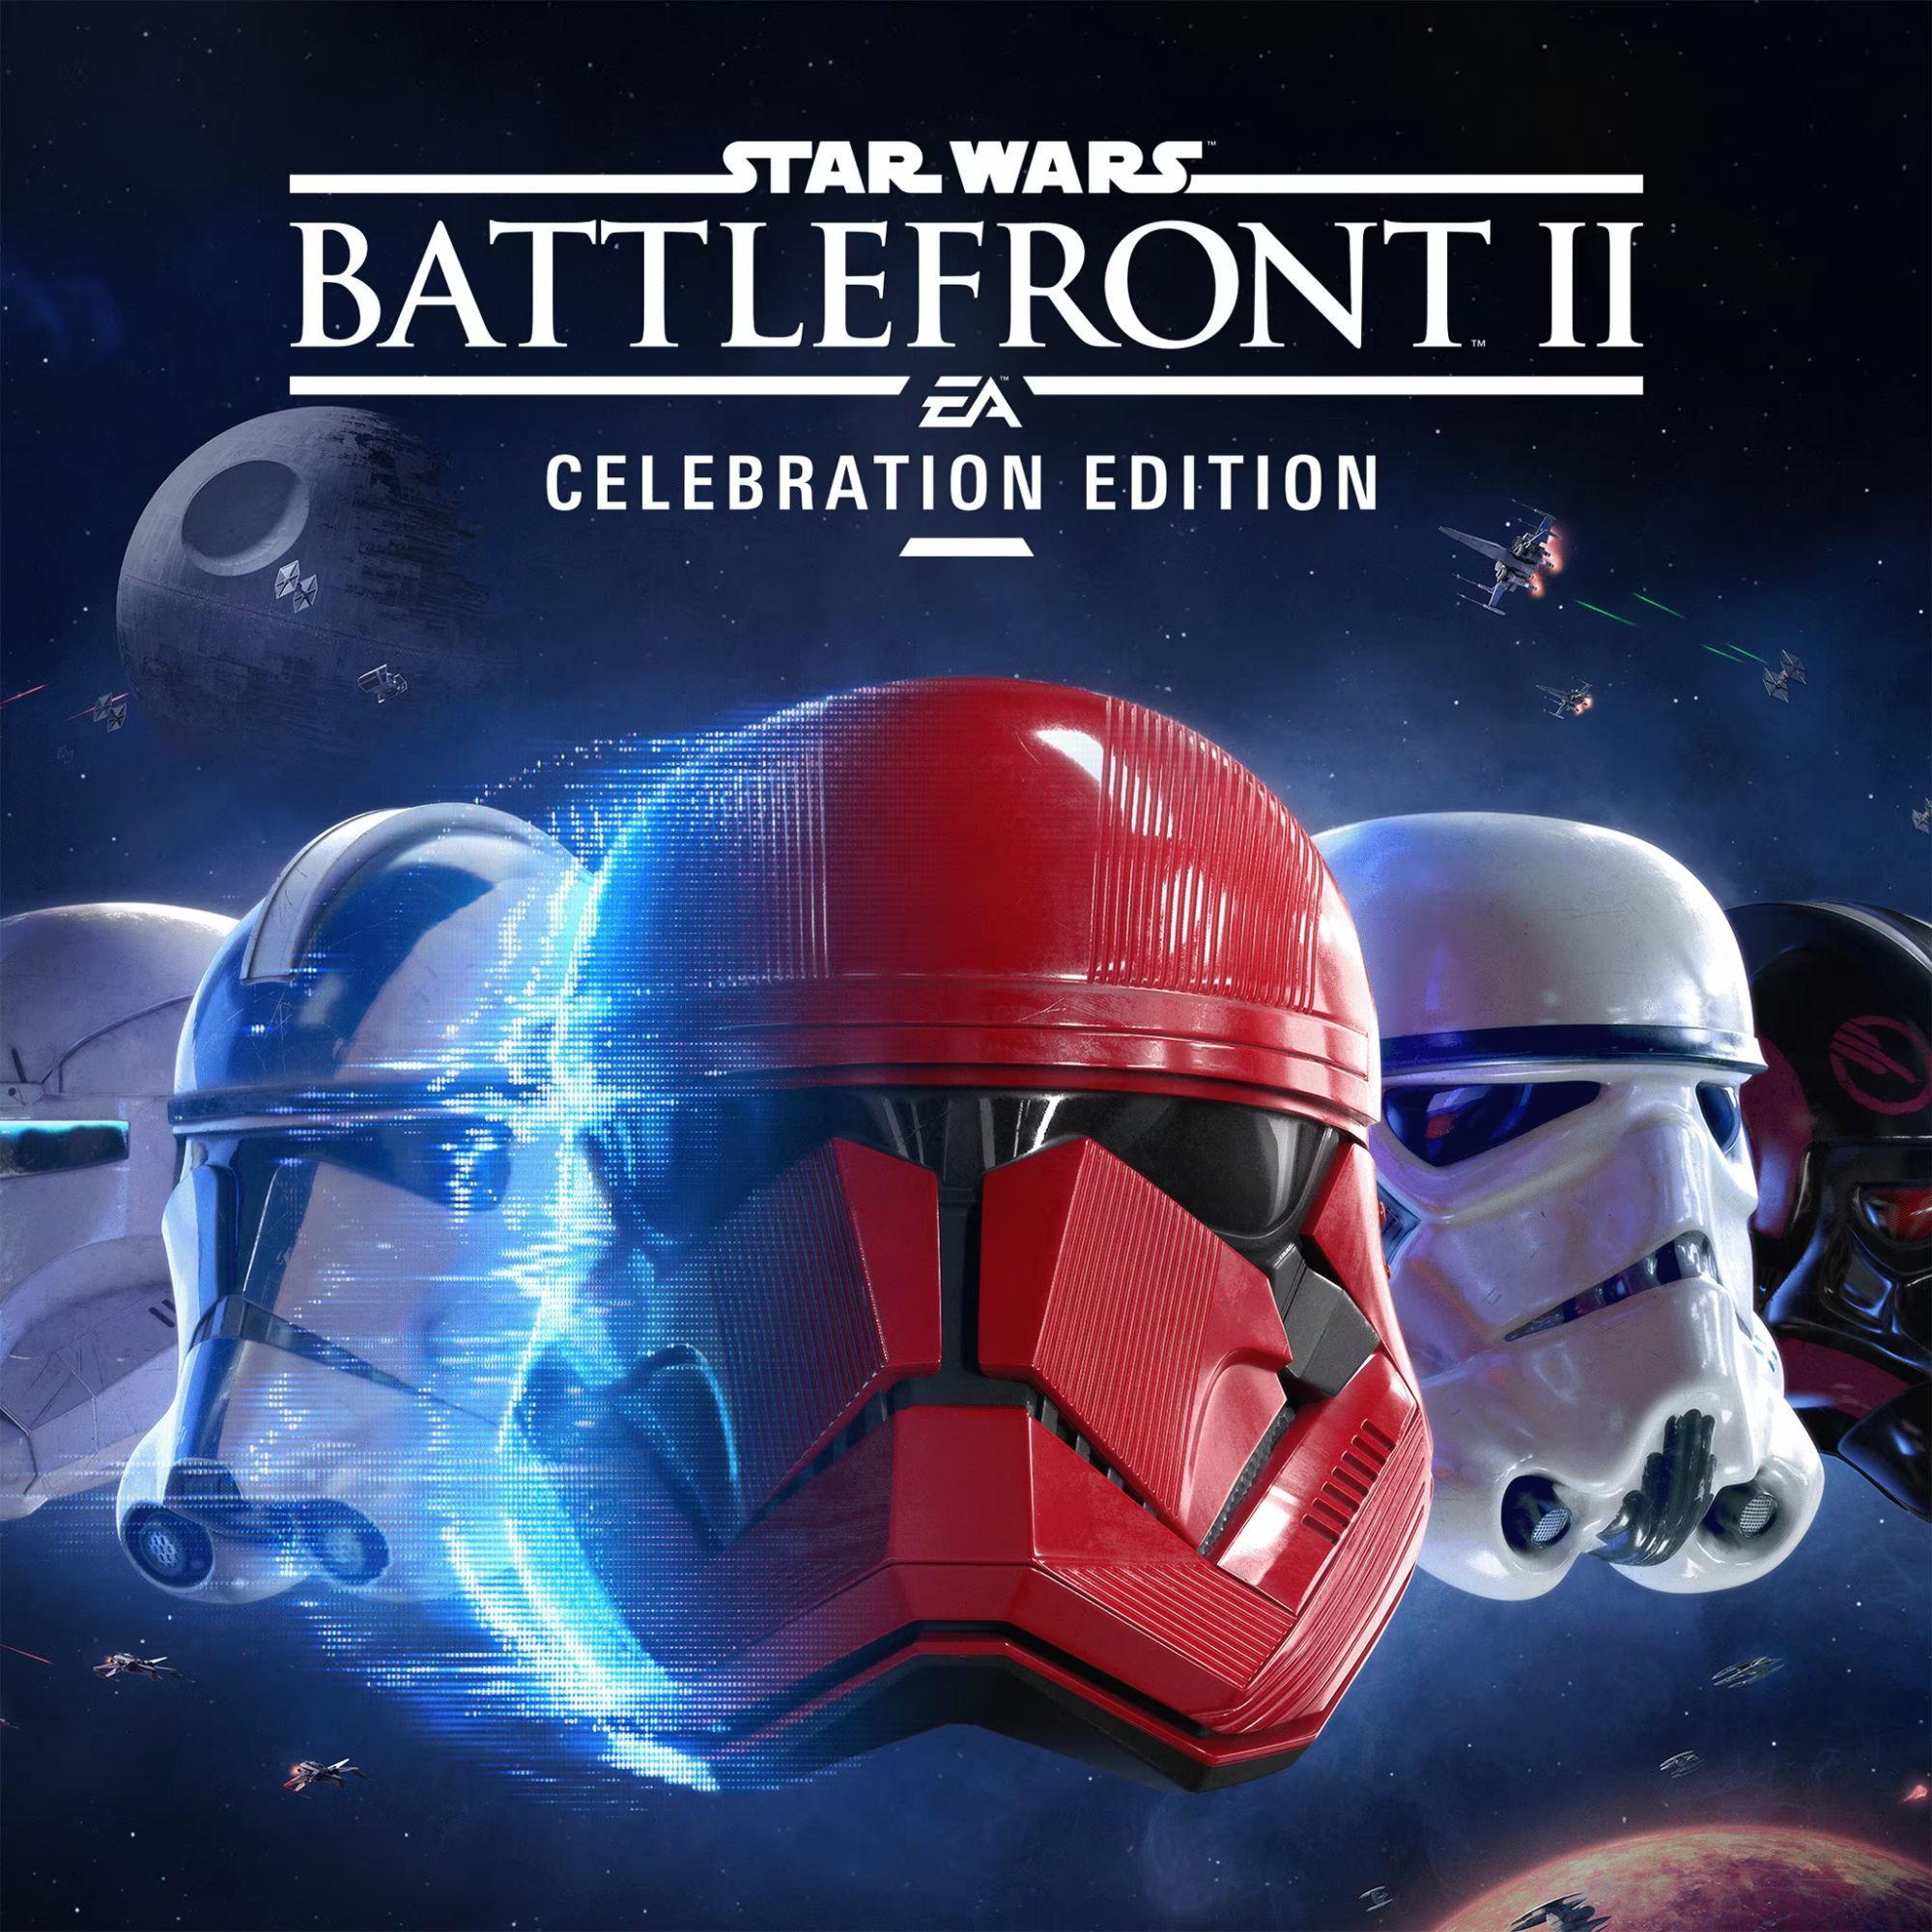 2000x2000 tag image for Star Wars Battlefront II: Celebration Edition. Different coloured Stormtrooper helmets phase into a blue haze.